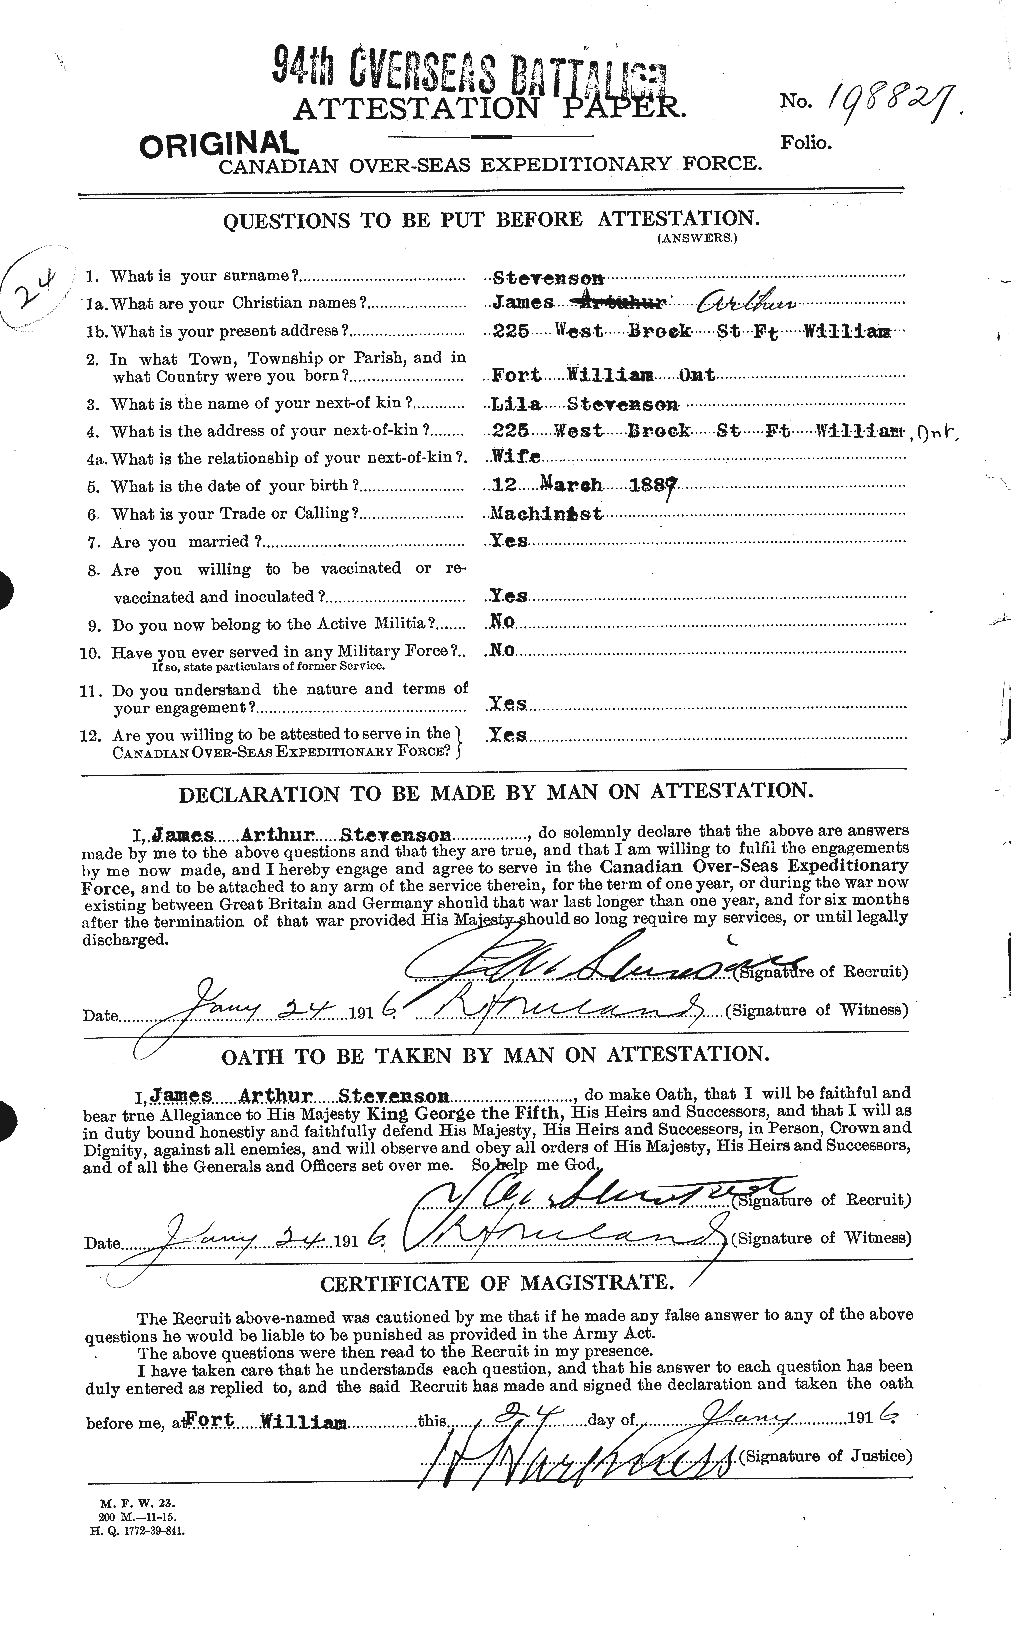 Personnel Records of the First World War - CEF 119006a